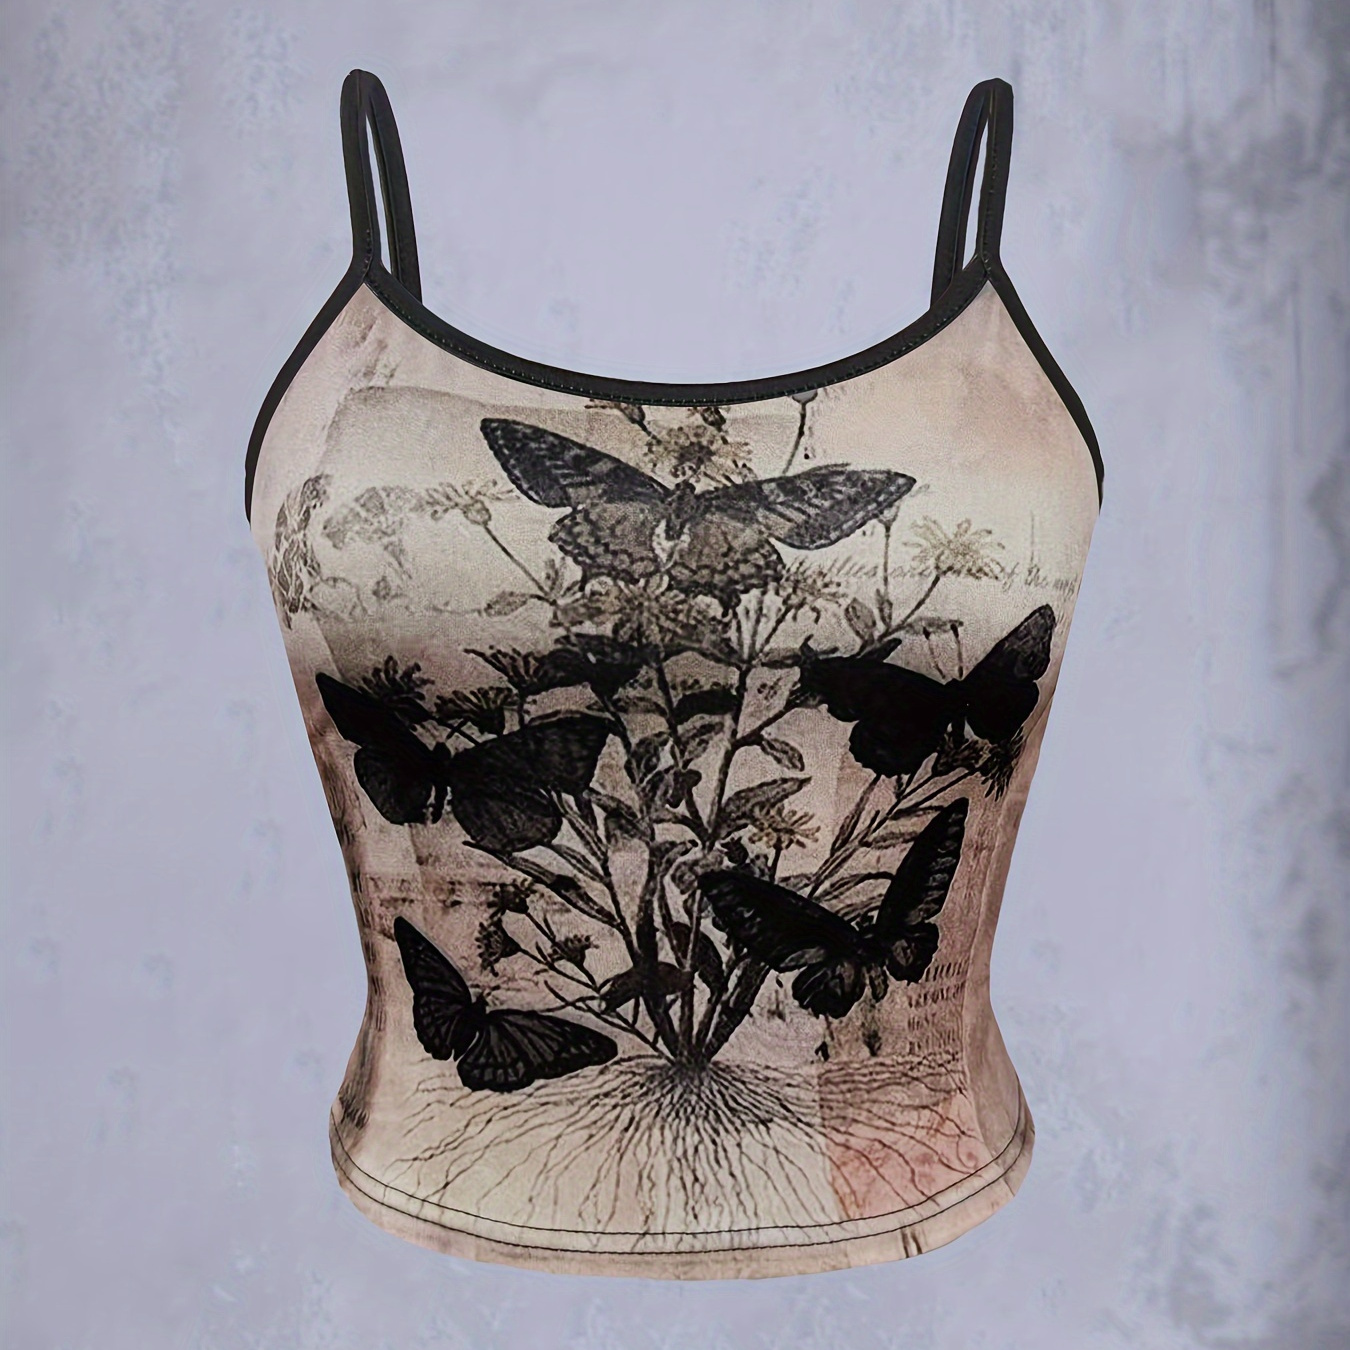 

Butterfly Print Spaghetti Strap Crop Top, Casual Slim Sleeveless Cami Tank Top For Summer, Women's Clothing For Y2k/grunge Style